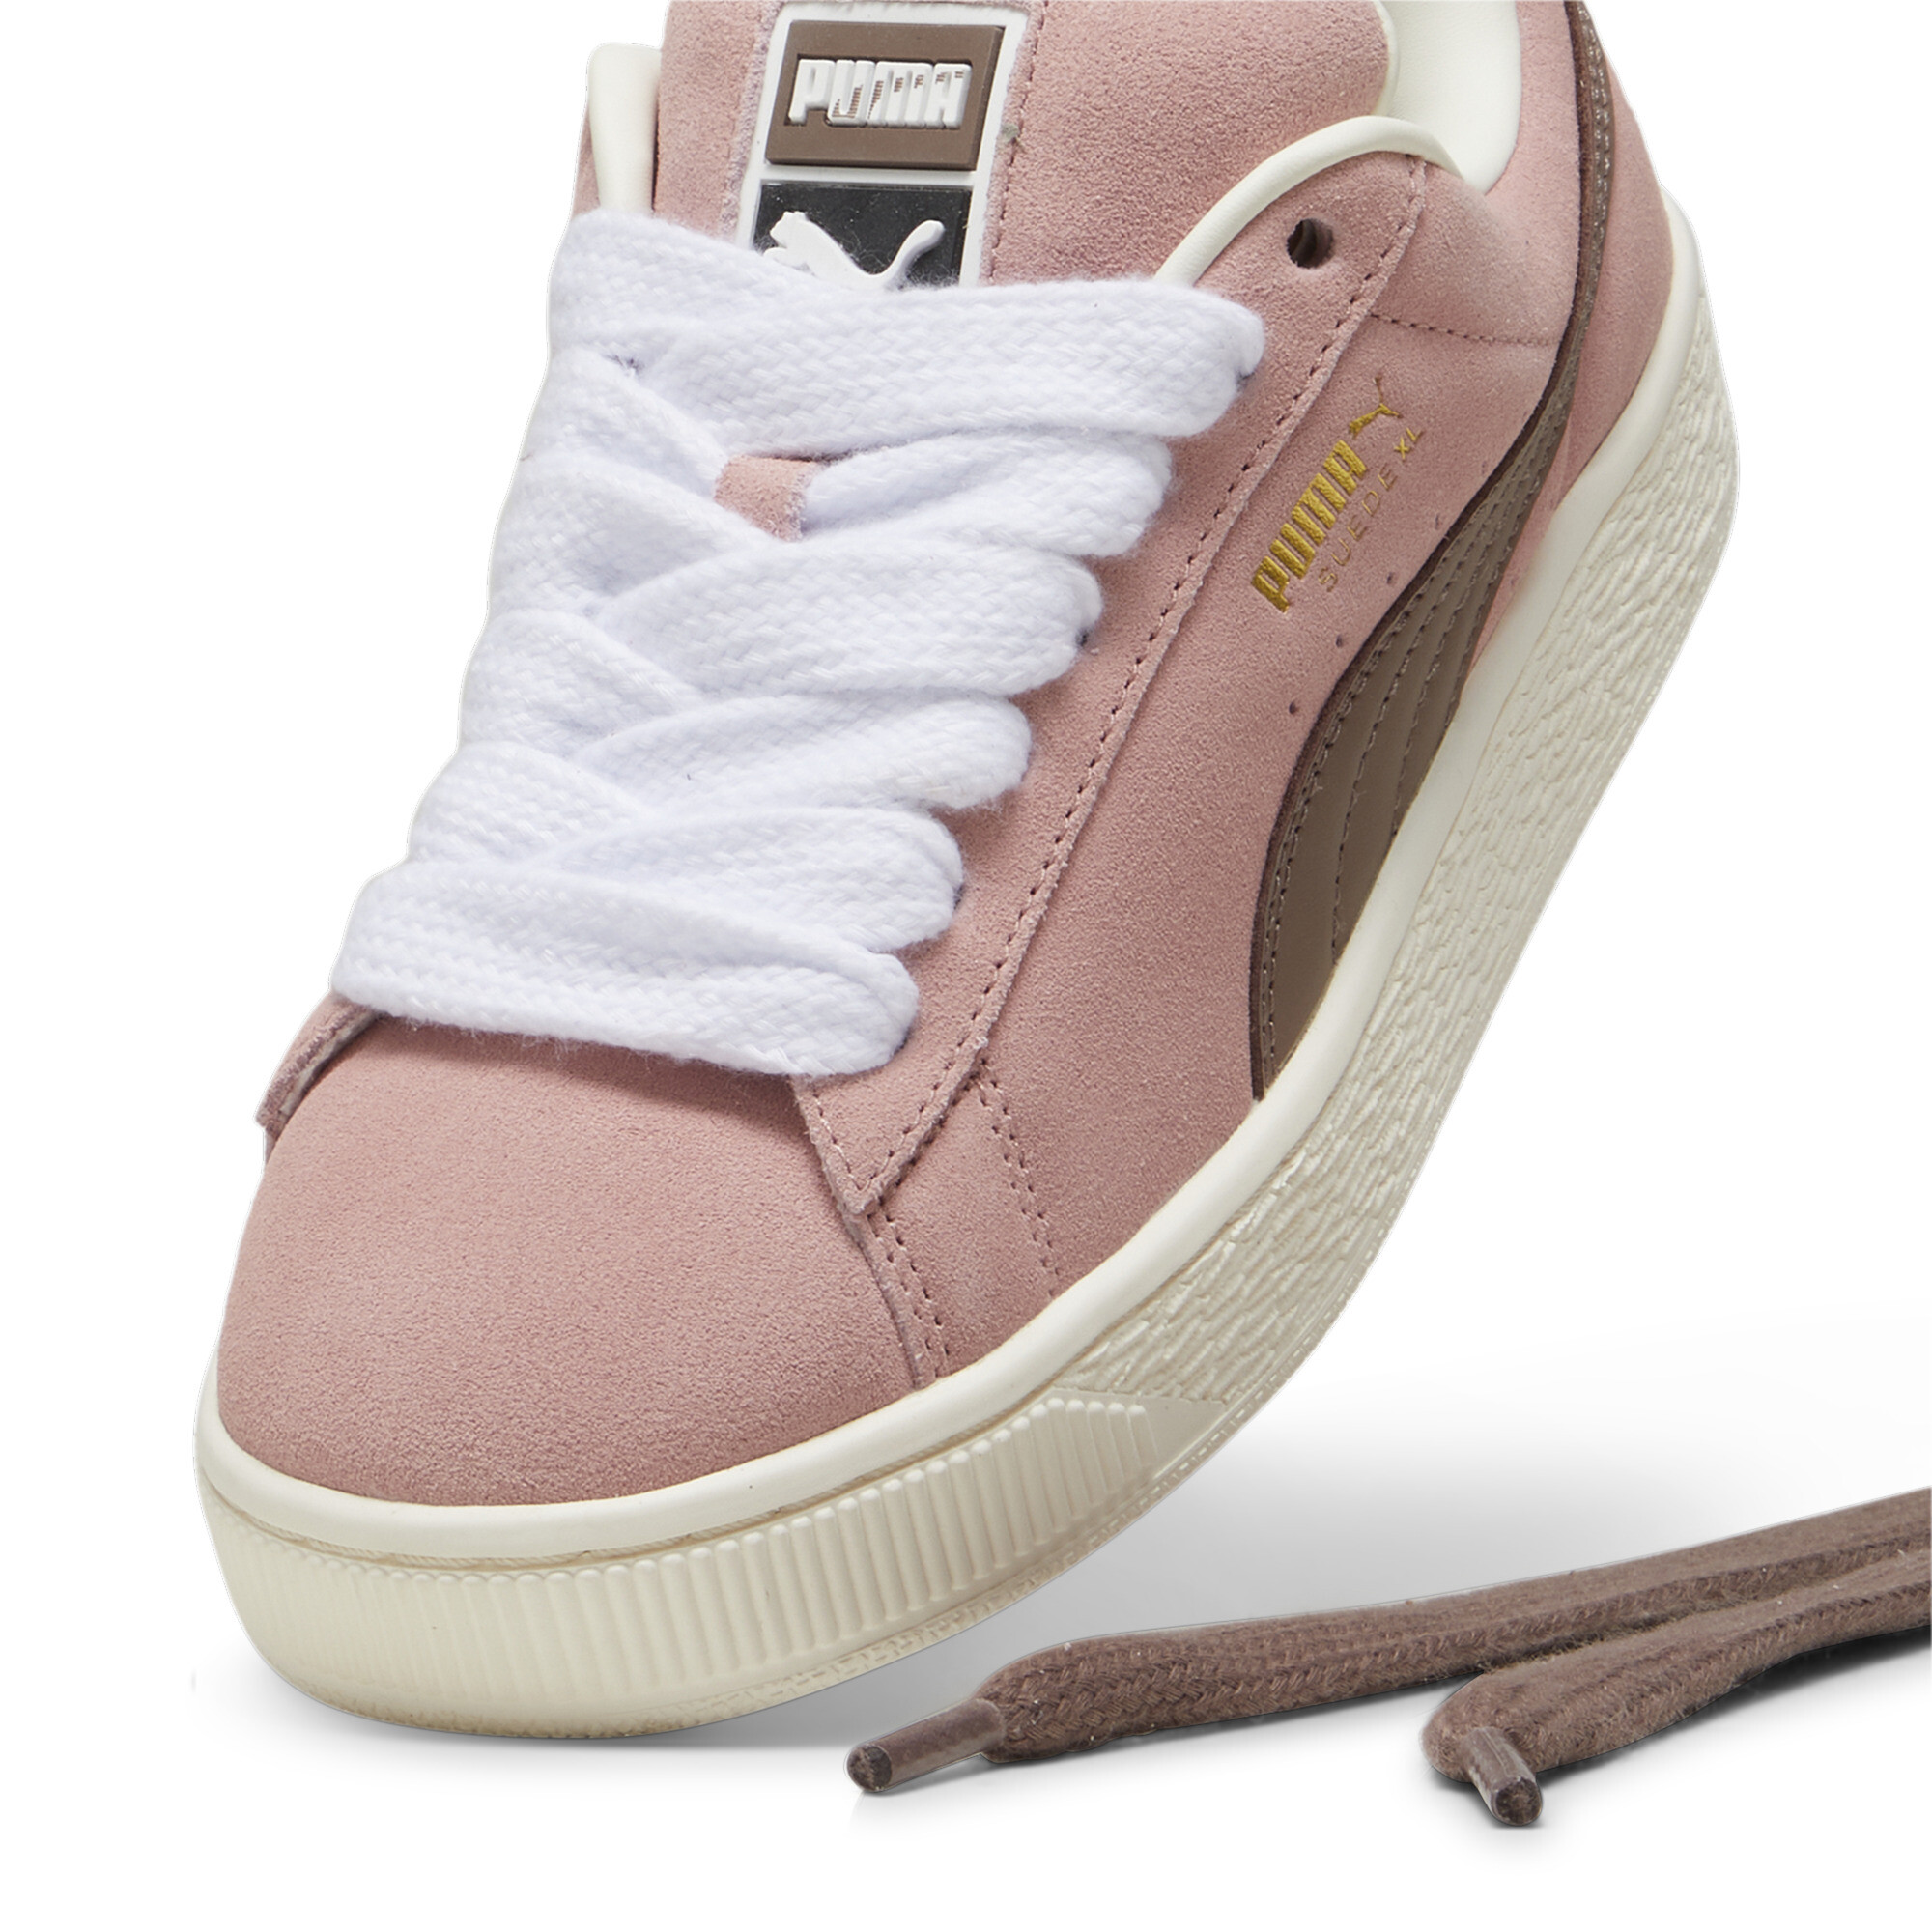 Puma Suede XL Sneakers Unisex, Pink, Size 42, Shoes